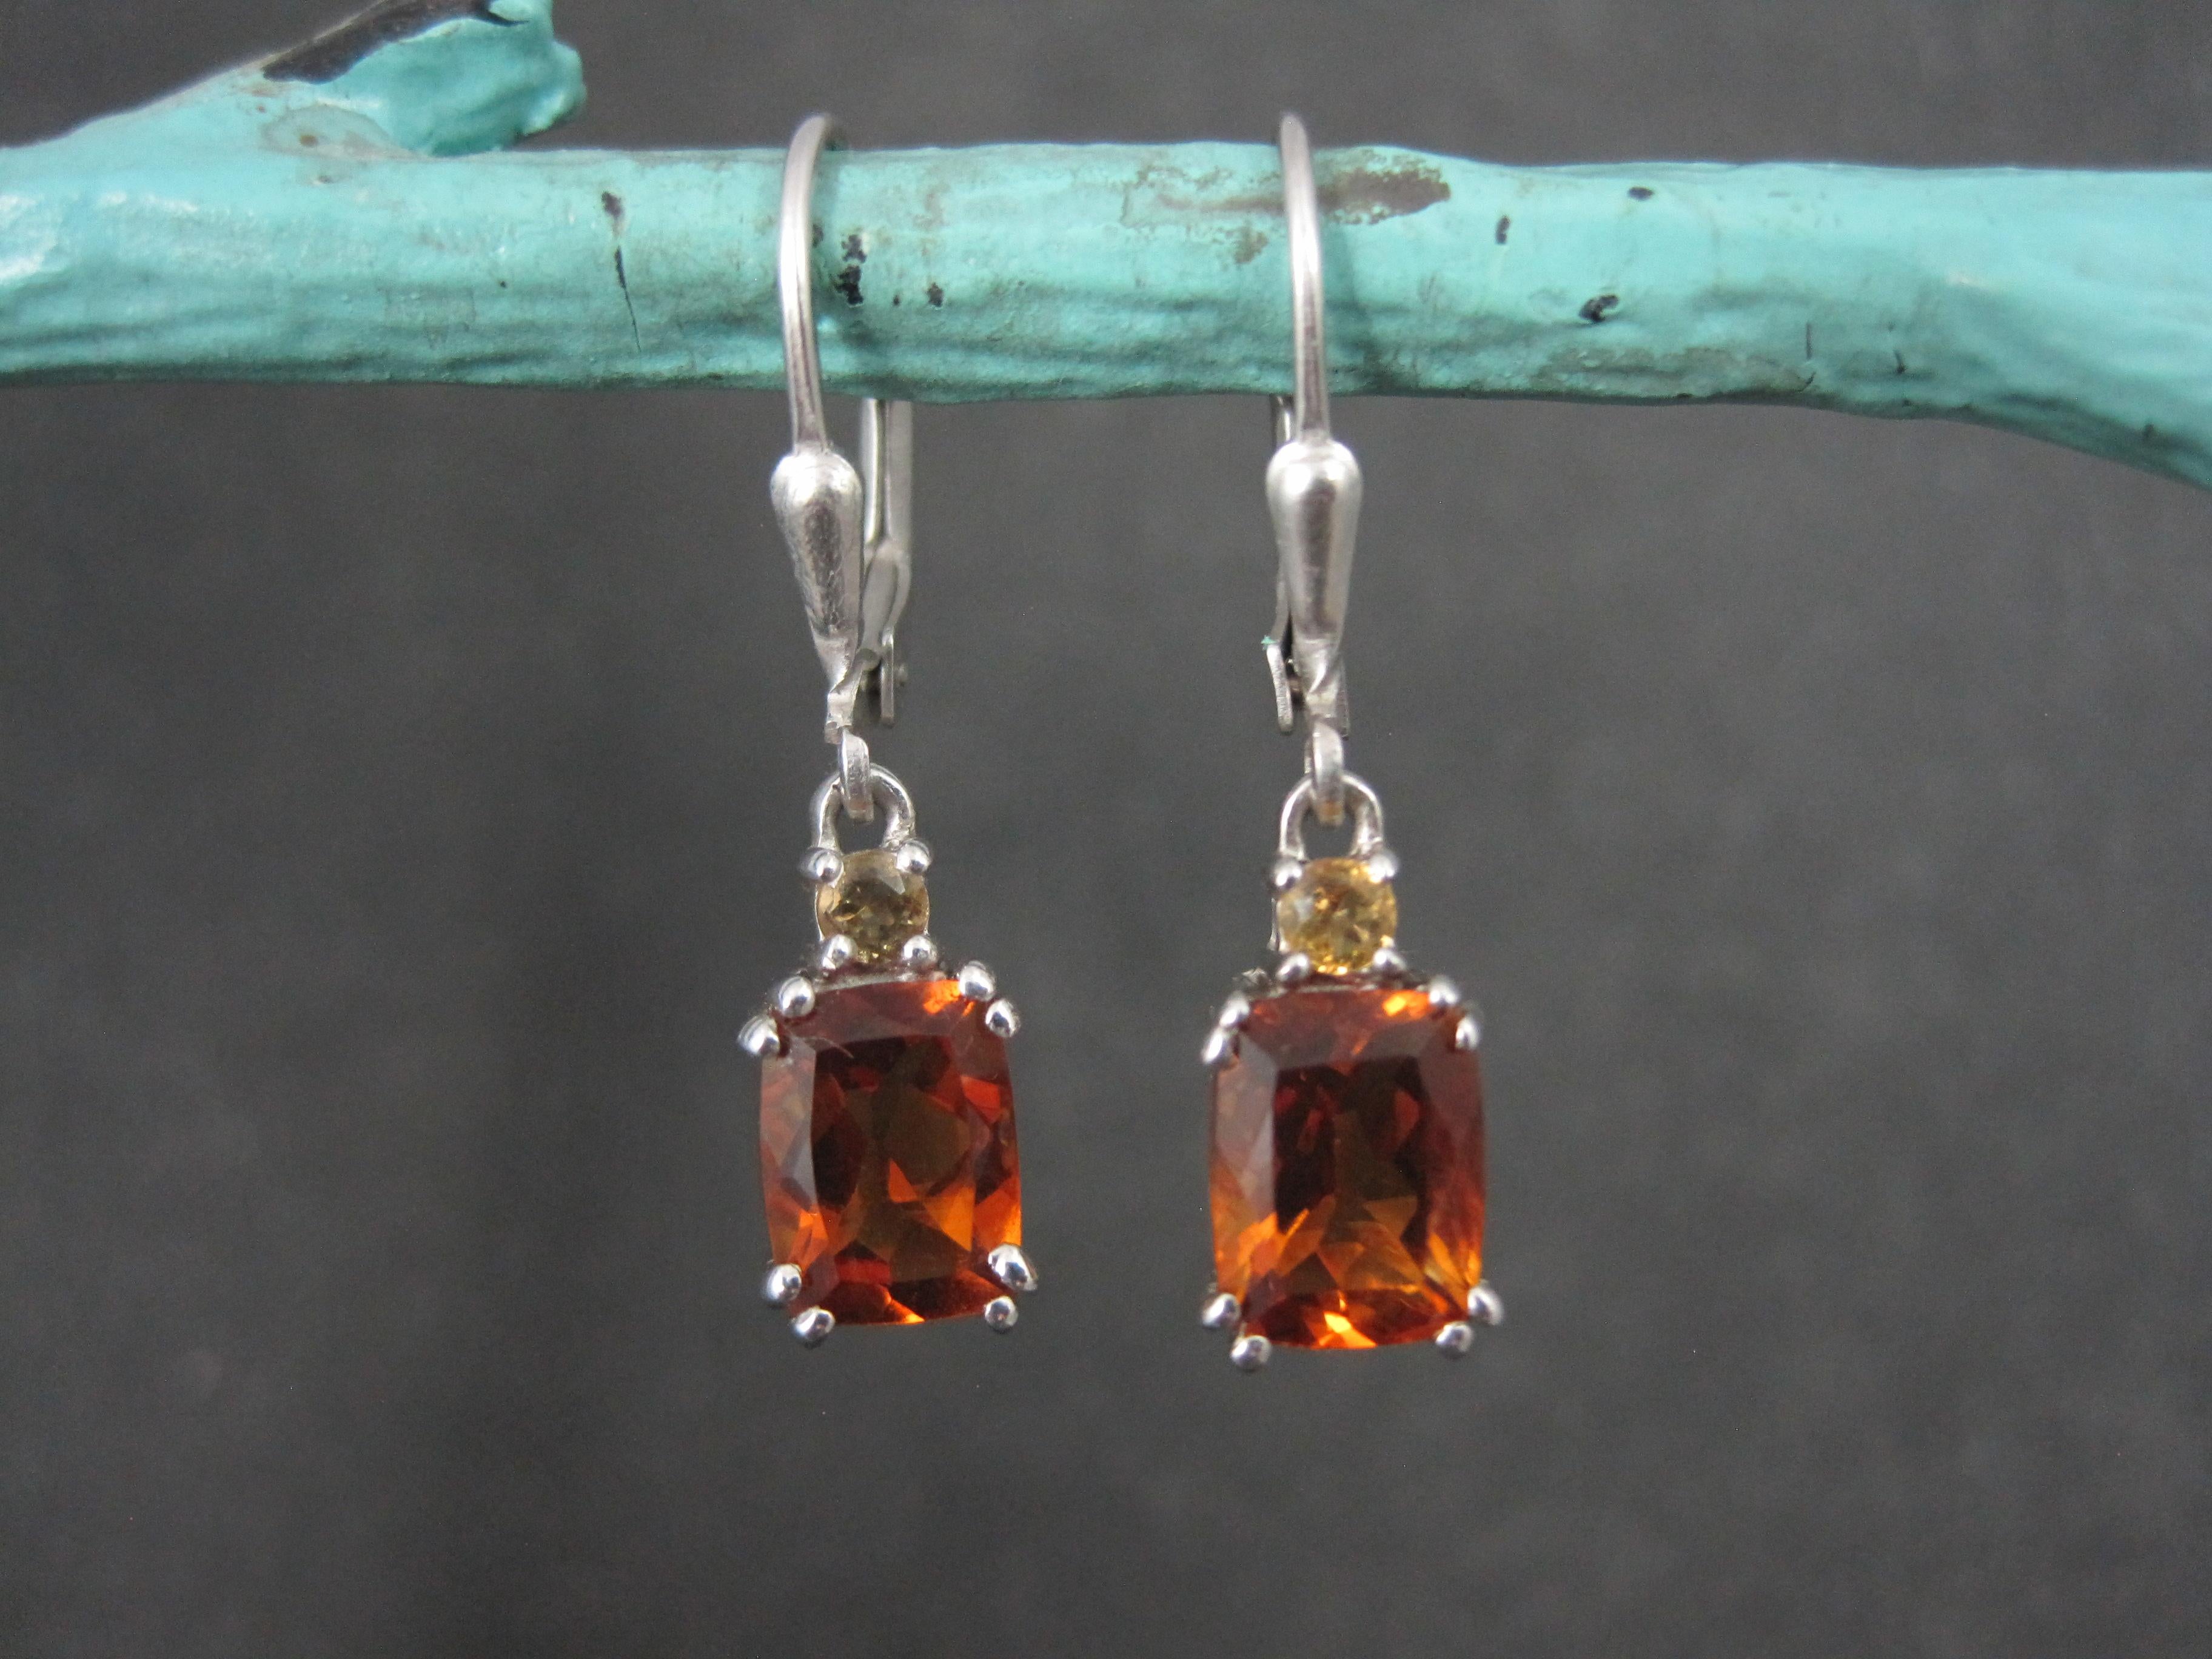 These gorgeous earrings are sterling silver with lever back closures.
Each features a 3mm citrine and an 8x6mm Maderia citrine.

Measurements: 1/4 by 1 1/8 inches from the top of the earwire
Weight: 2.9 grams

Condition: New